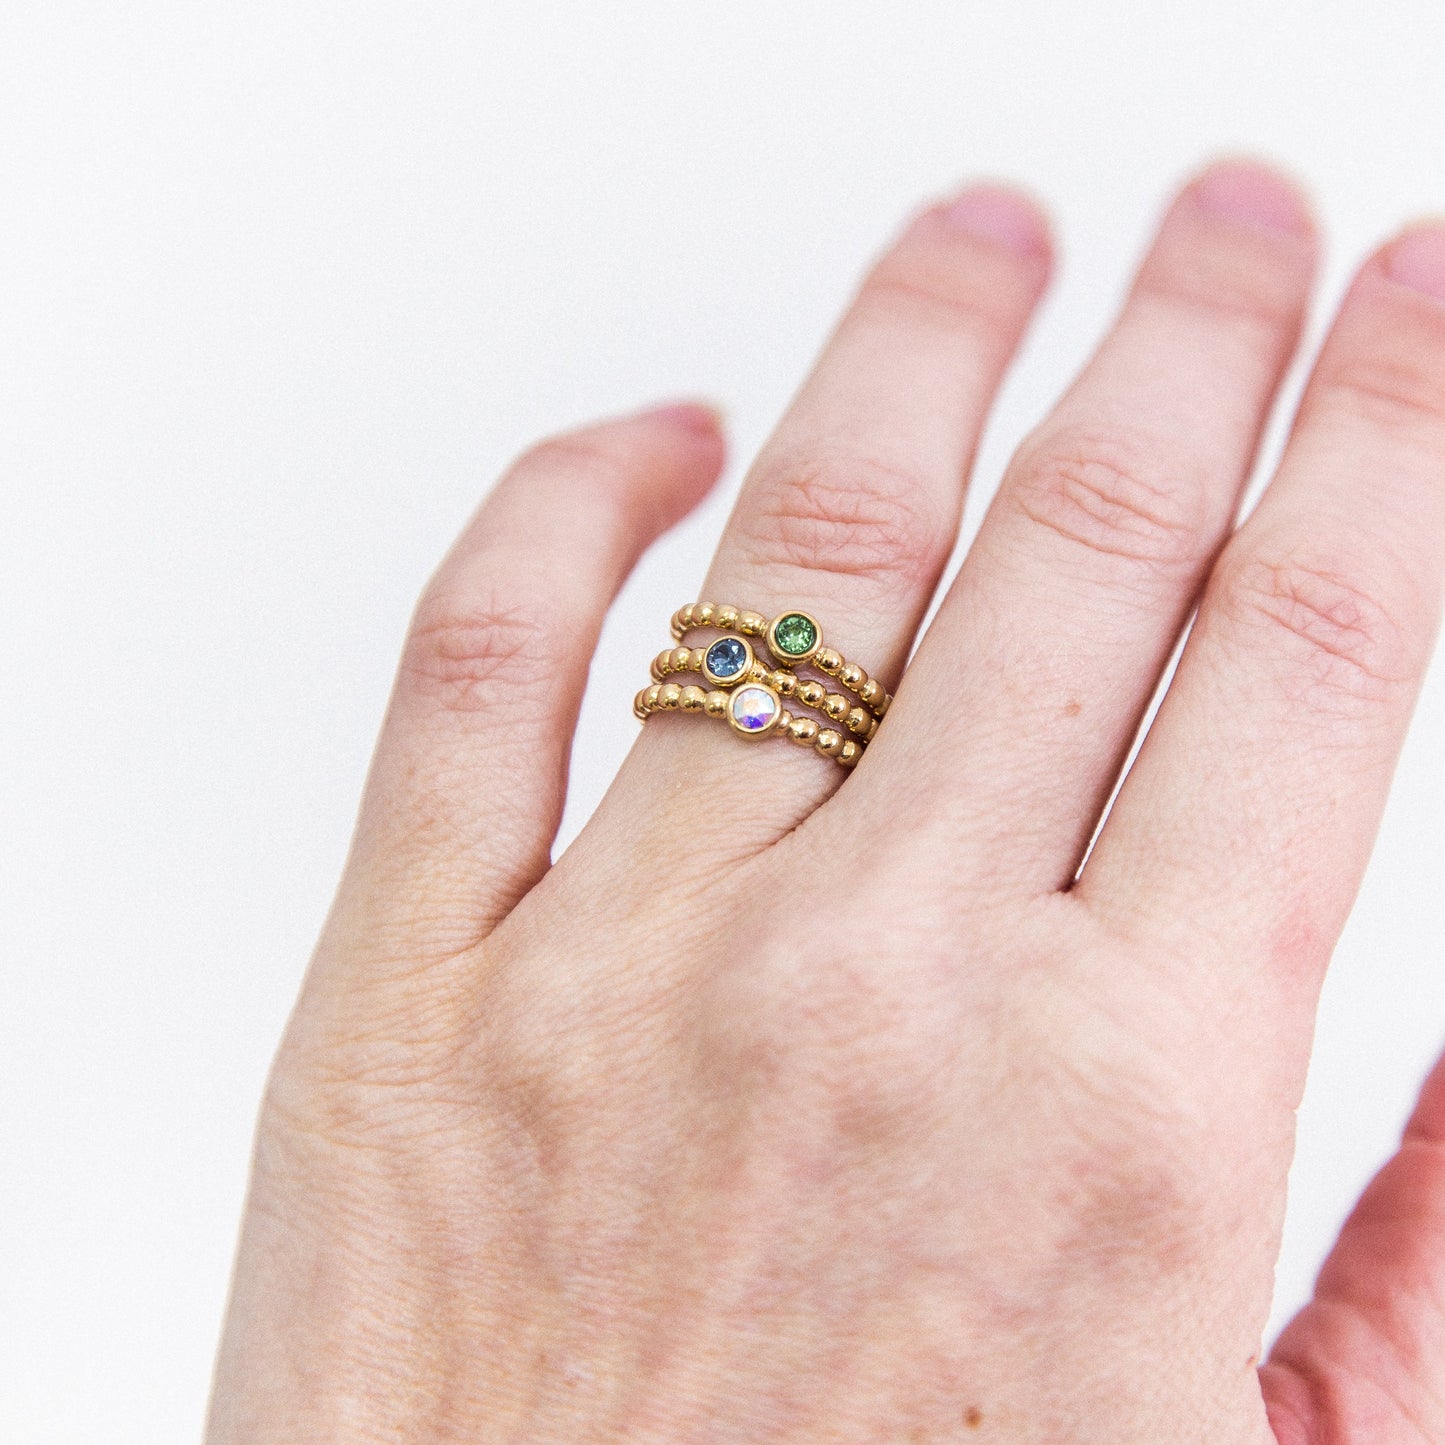 Matino Deluxe Ring in Gold - Denim Blue